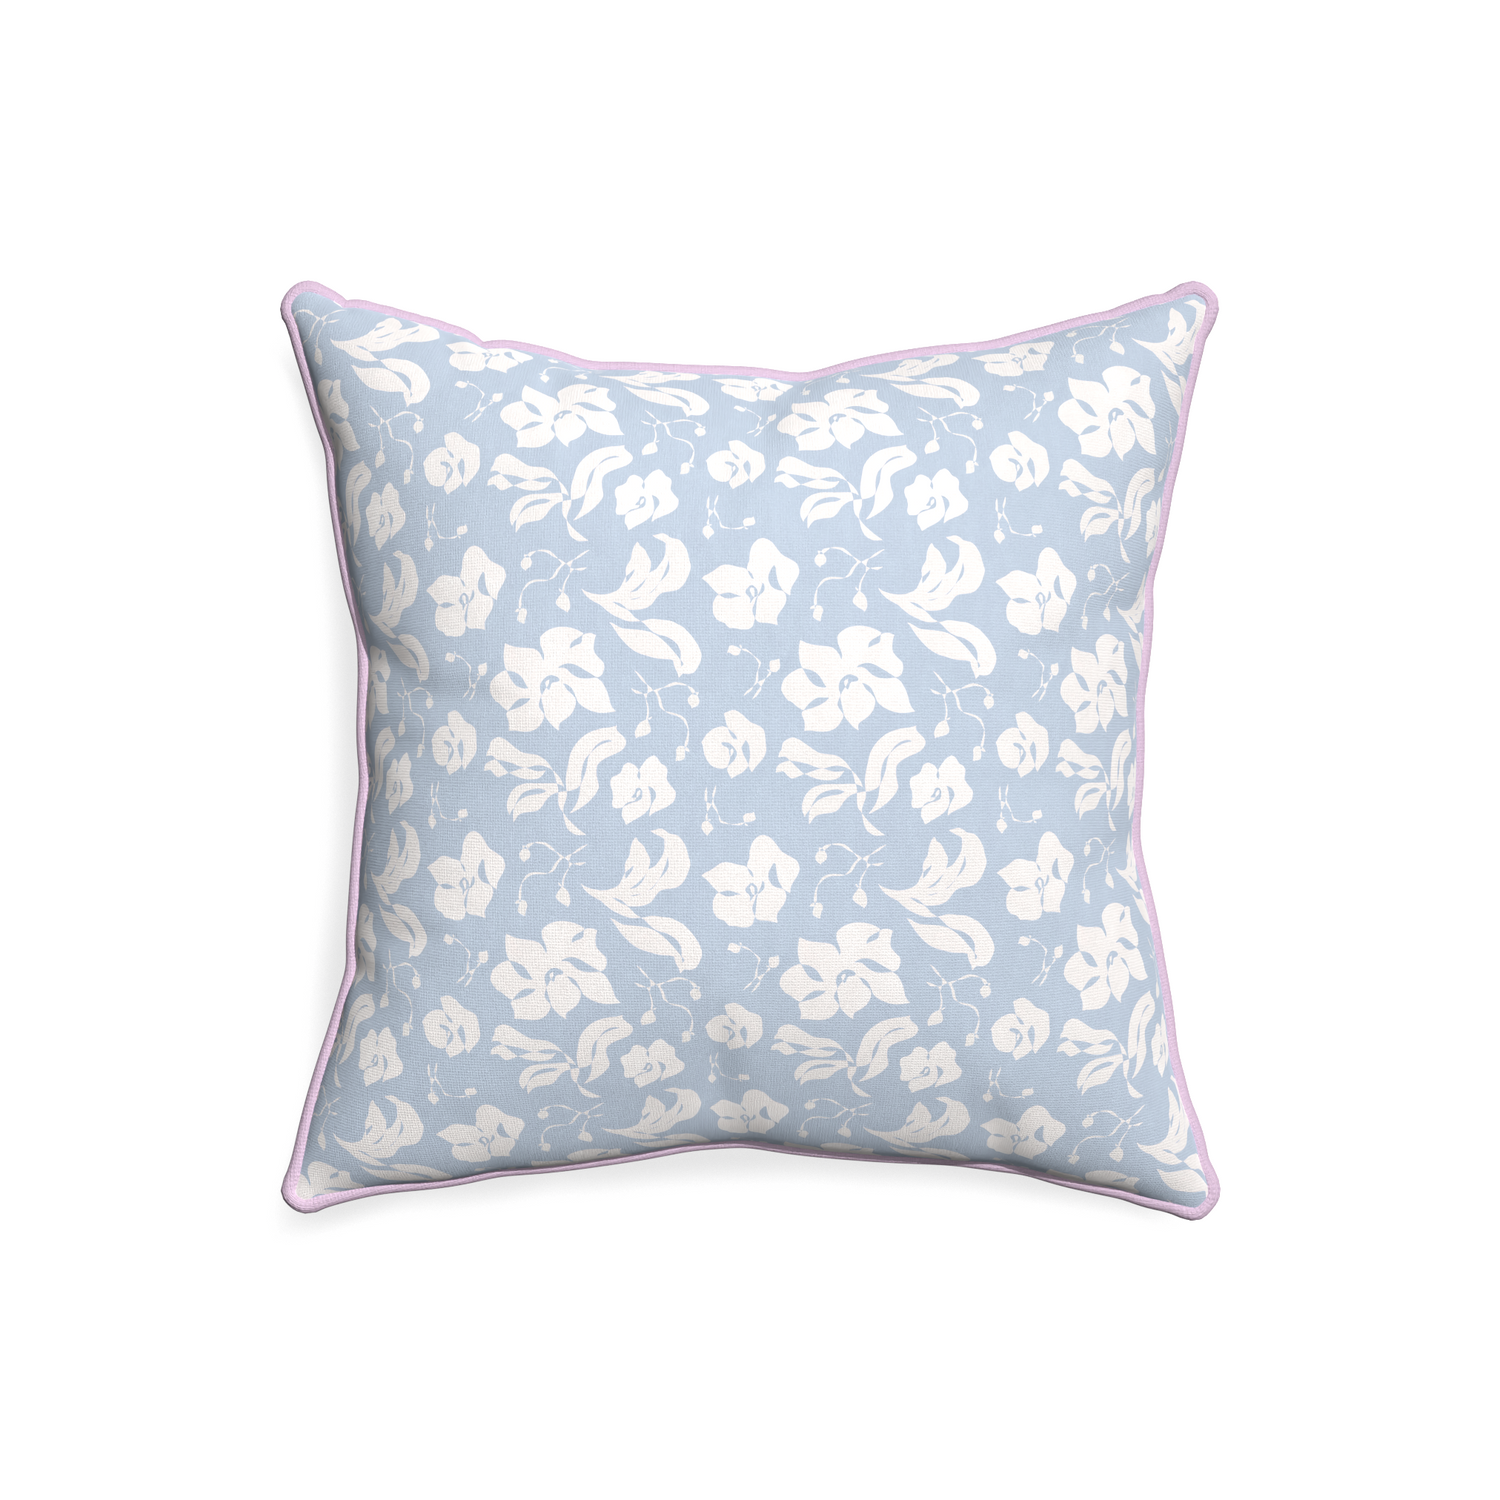 20-square georgia custom pillow with l piping on white background